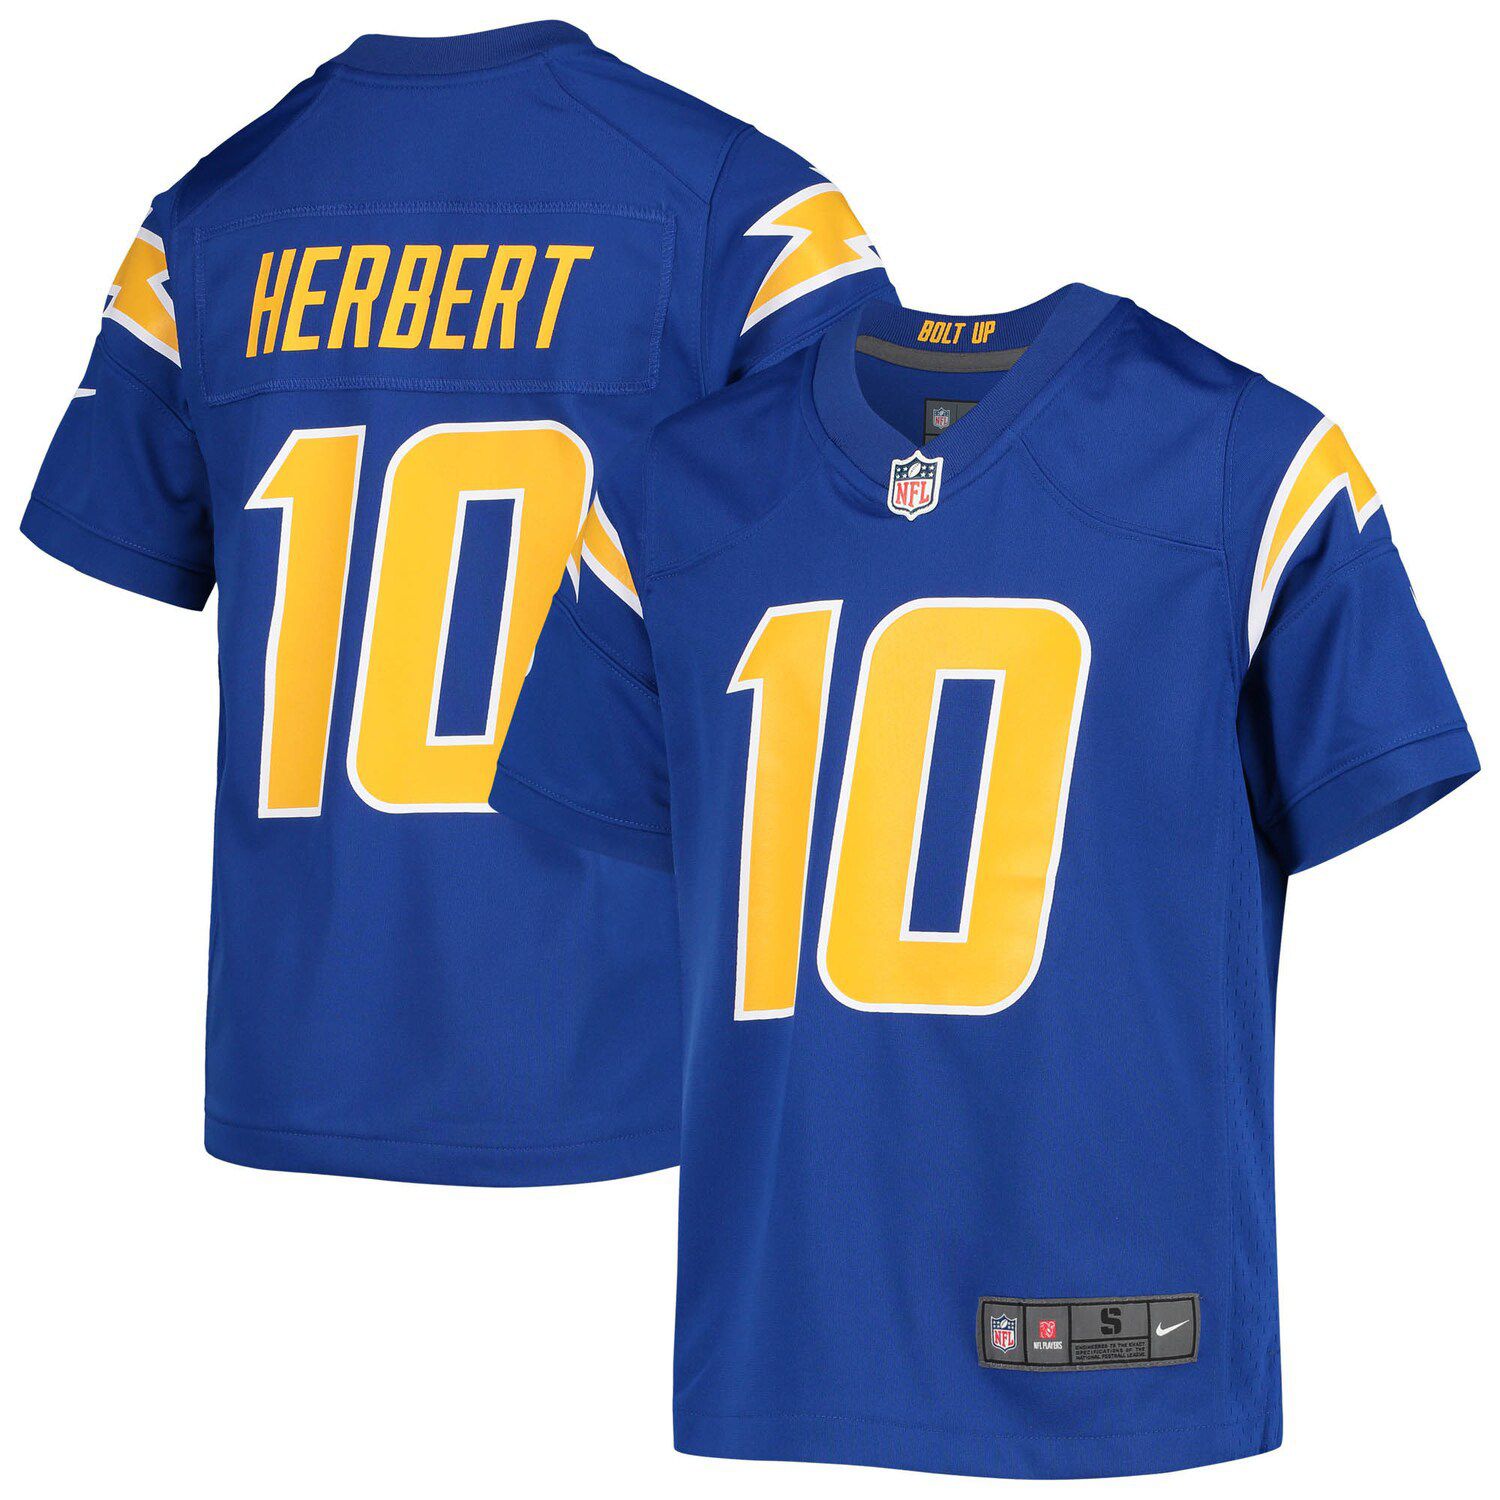 5t chargers jersey